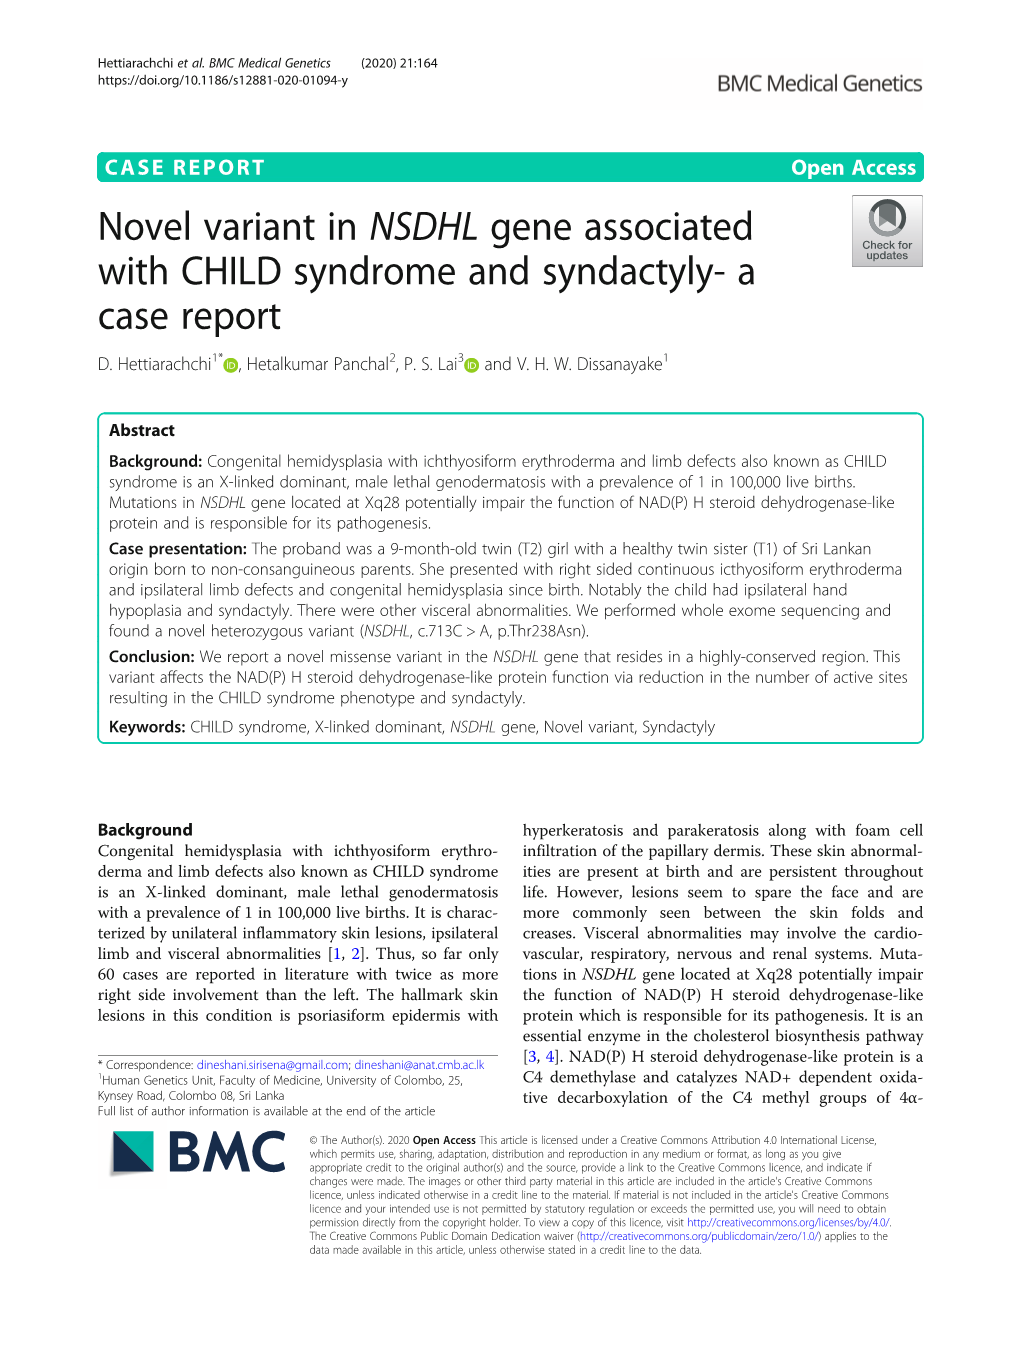 Novel Variant in NSDHL Gene Associated with CHILD Syndrome and Syndactyly- a Case Report D